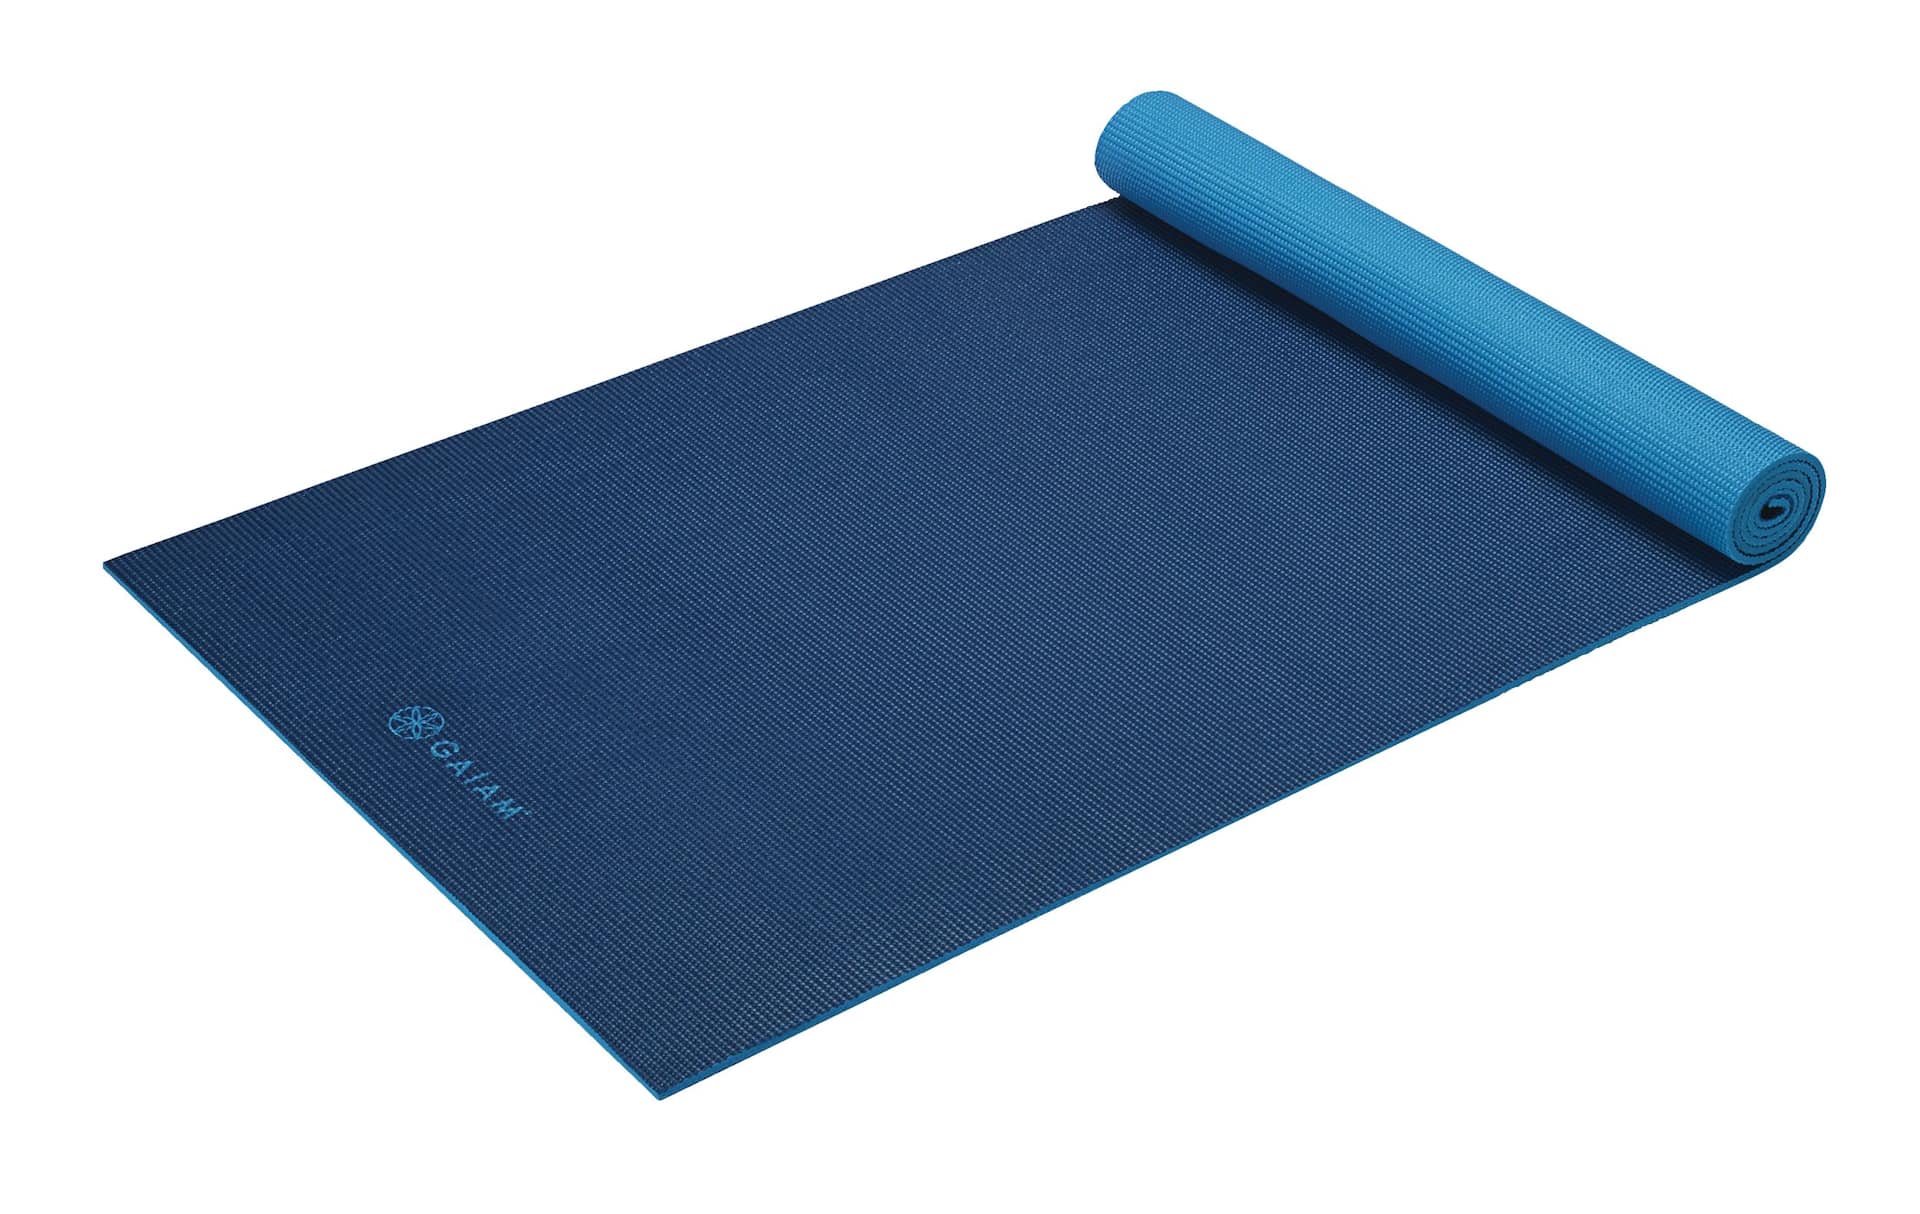 Opening up a new Gaiam yoga mat, and 3 weeks later report 